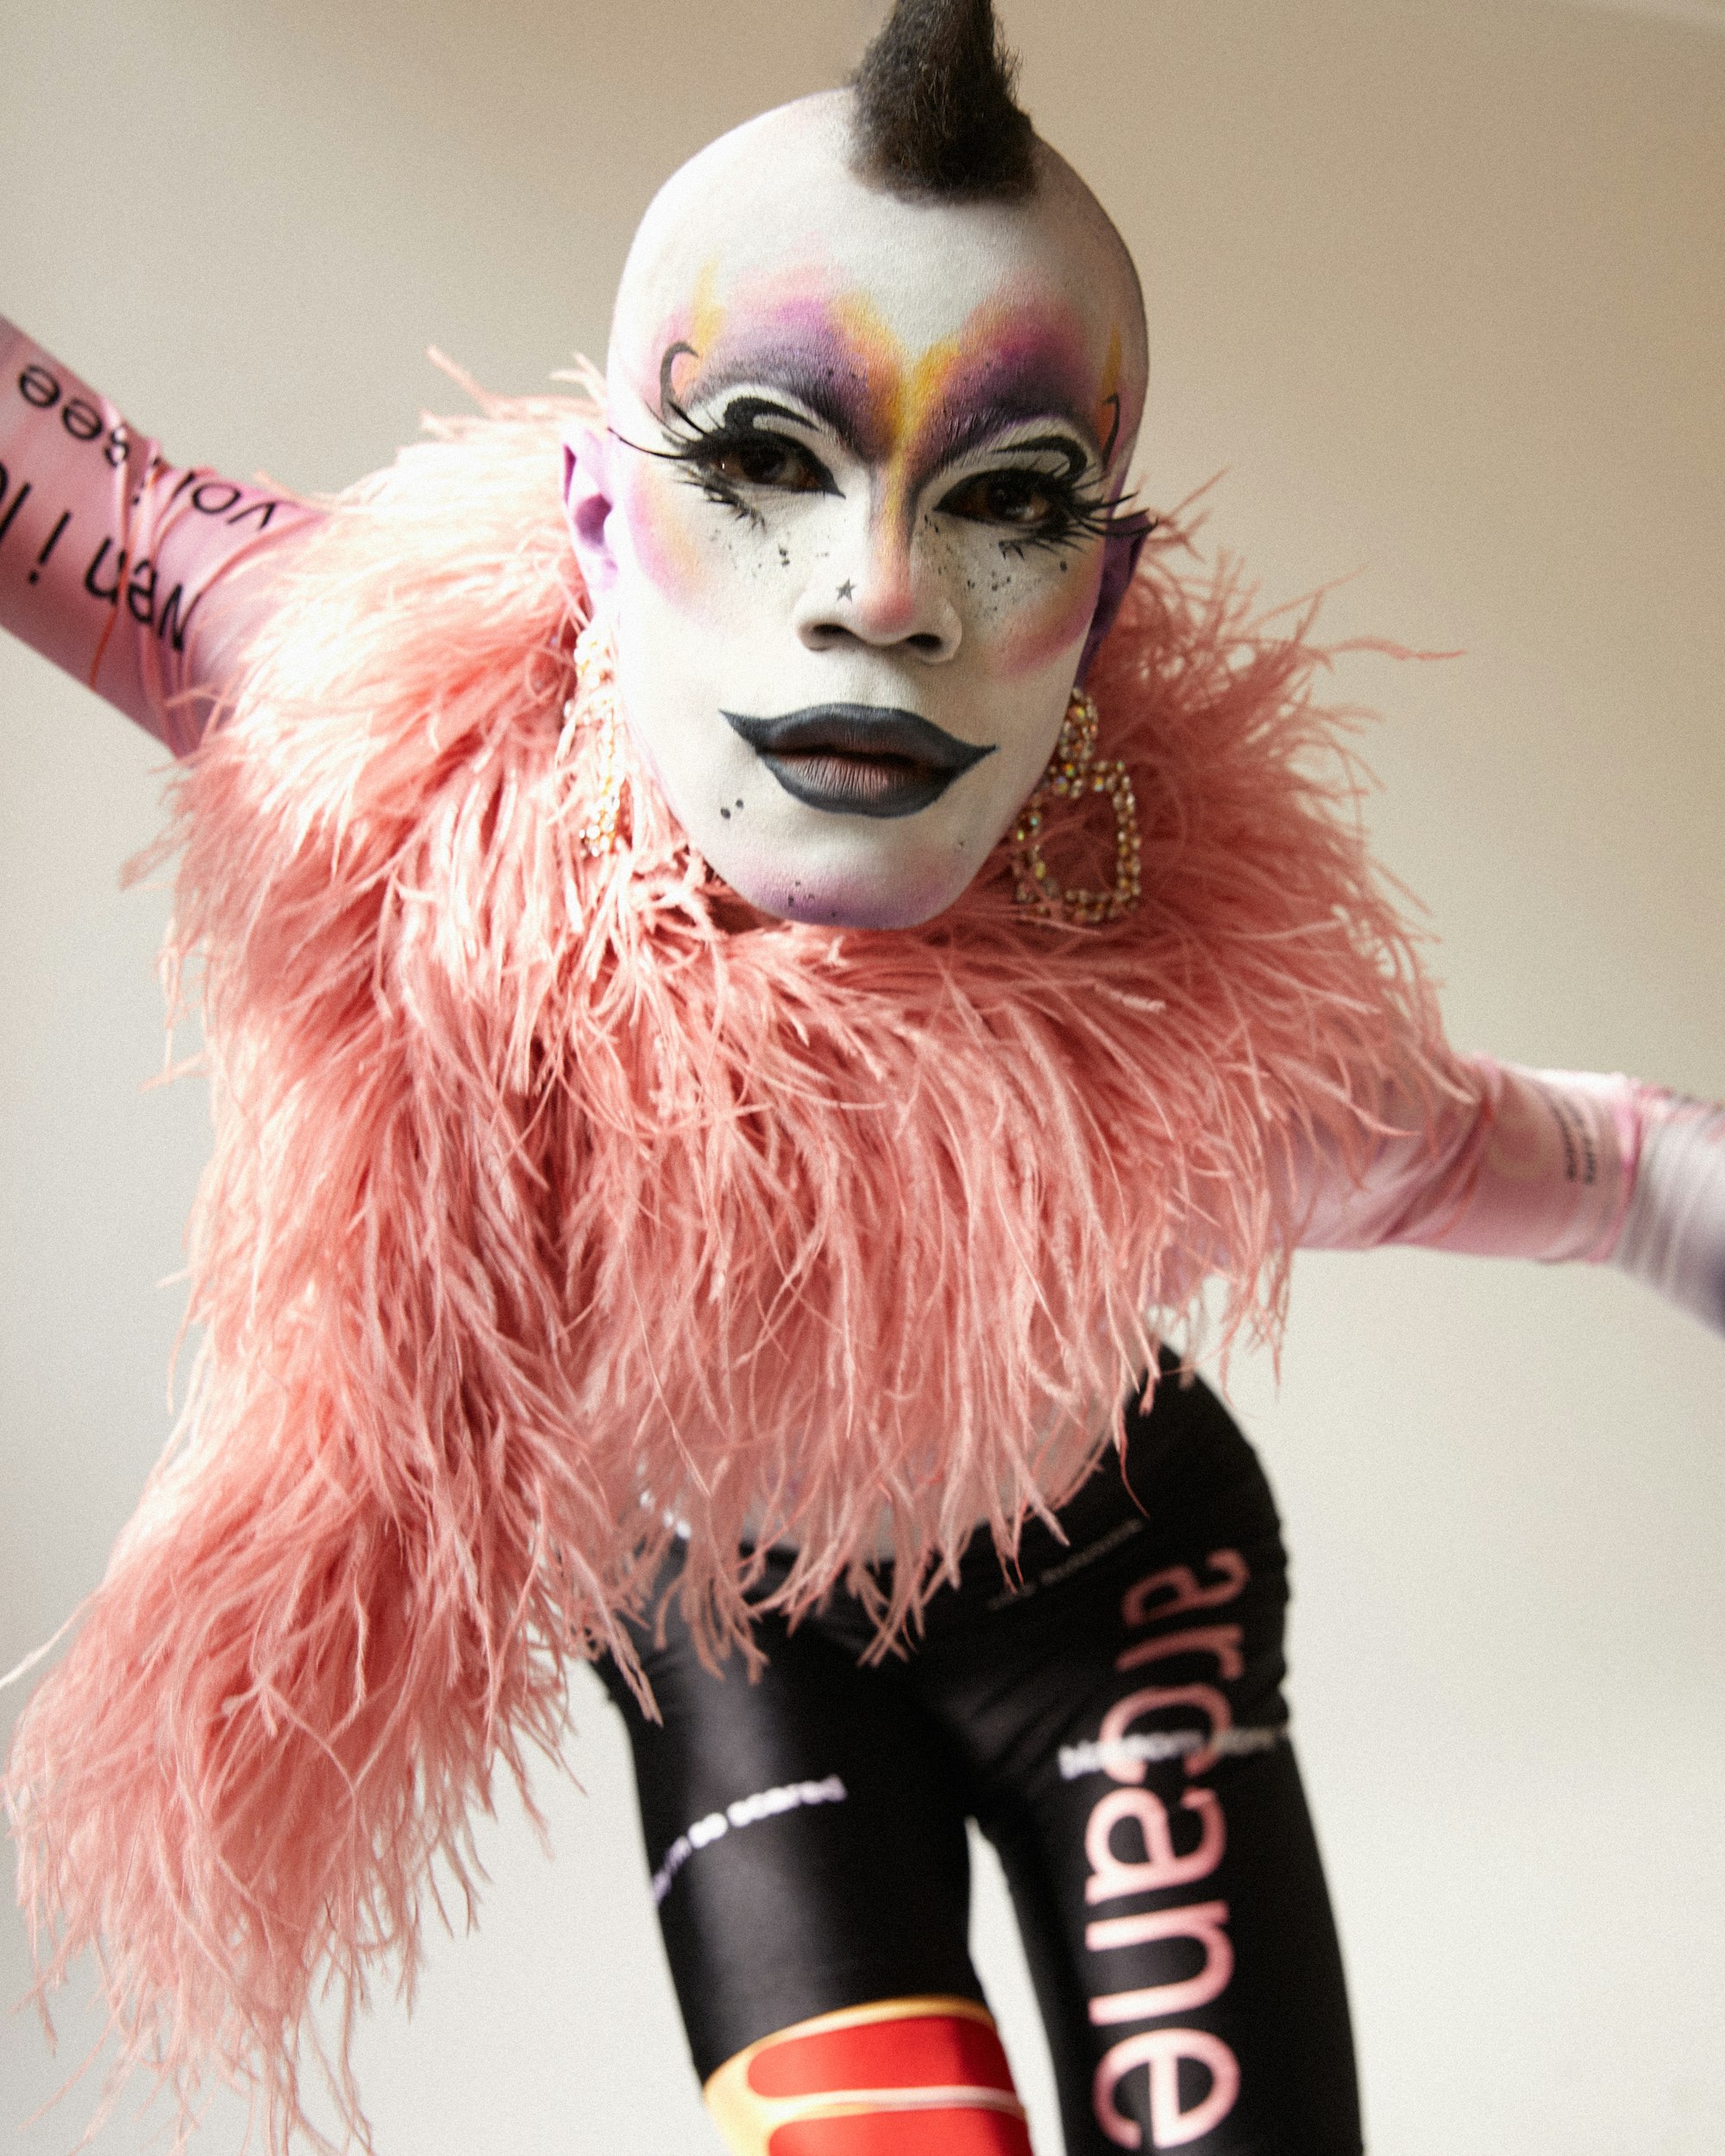 A person in heavy make-up wearing pale pink features and big earrings